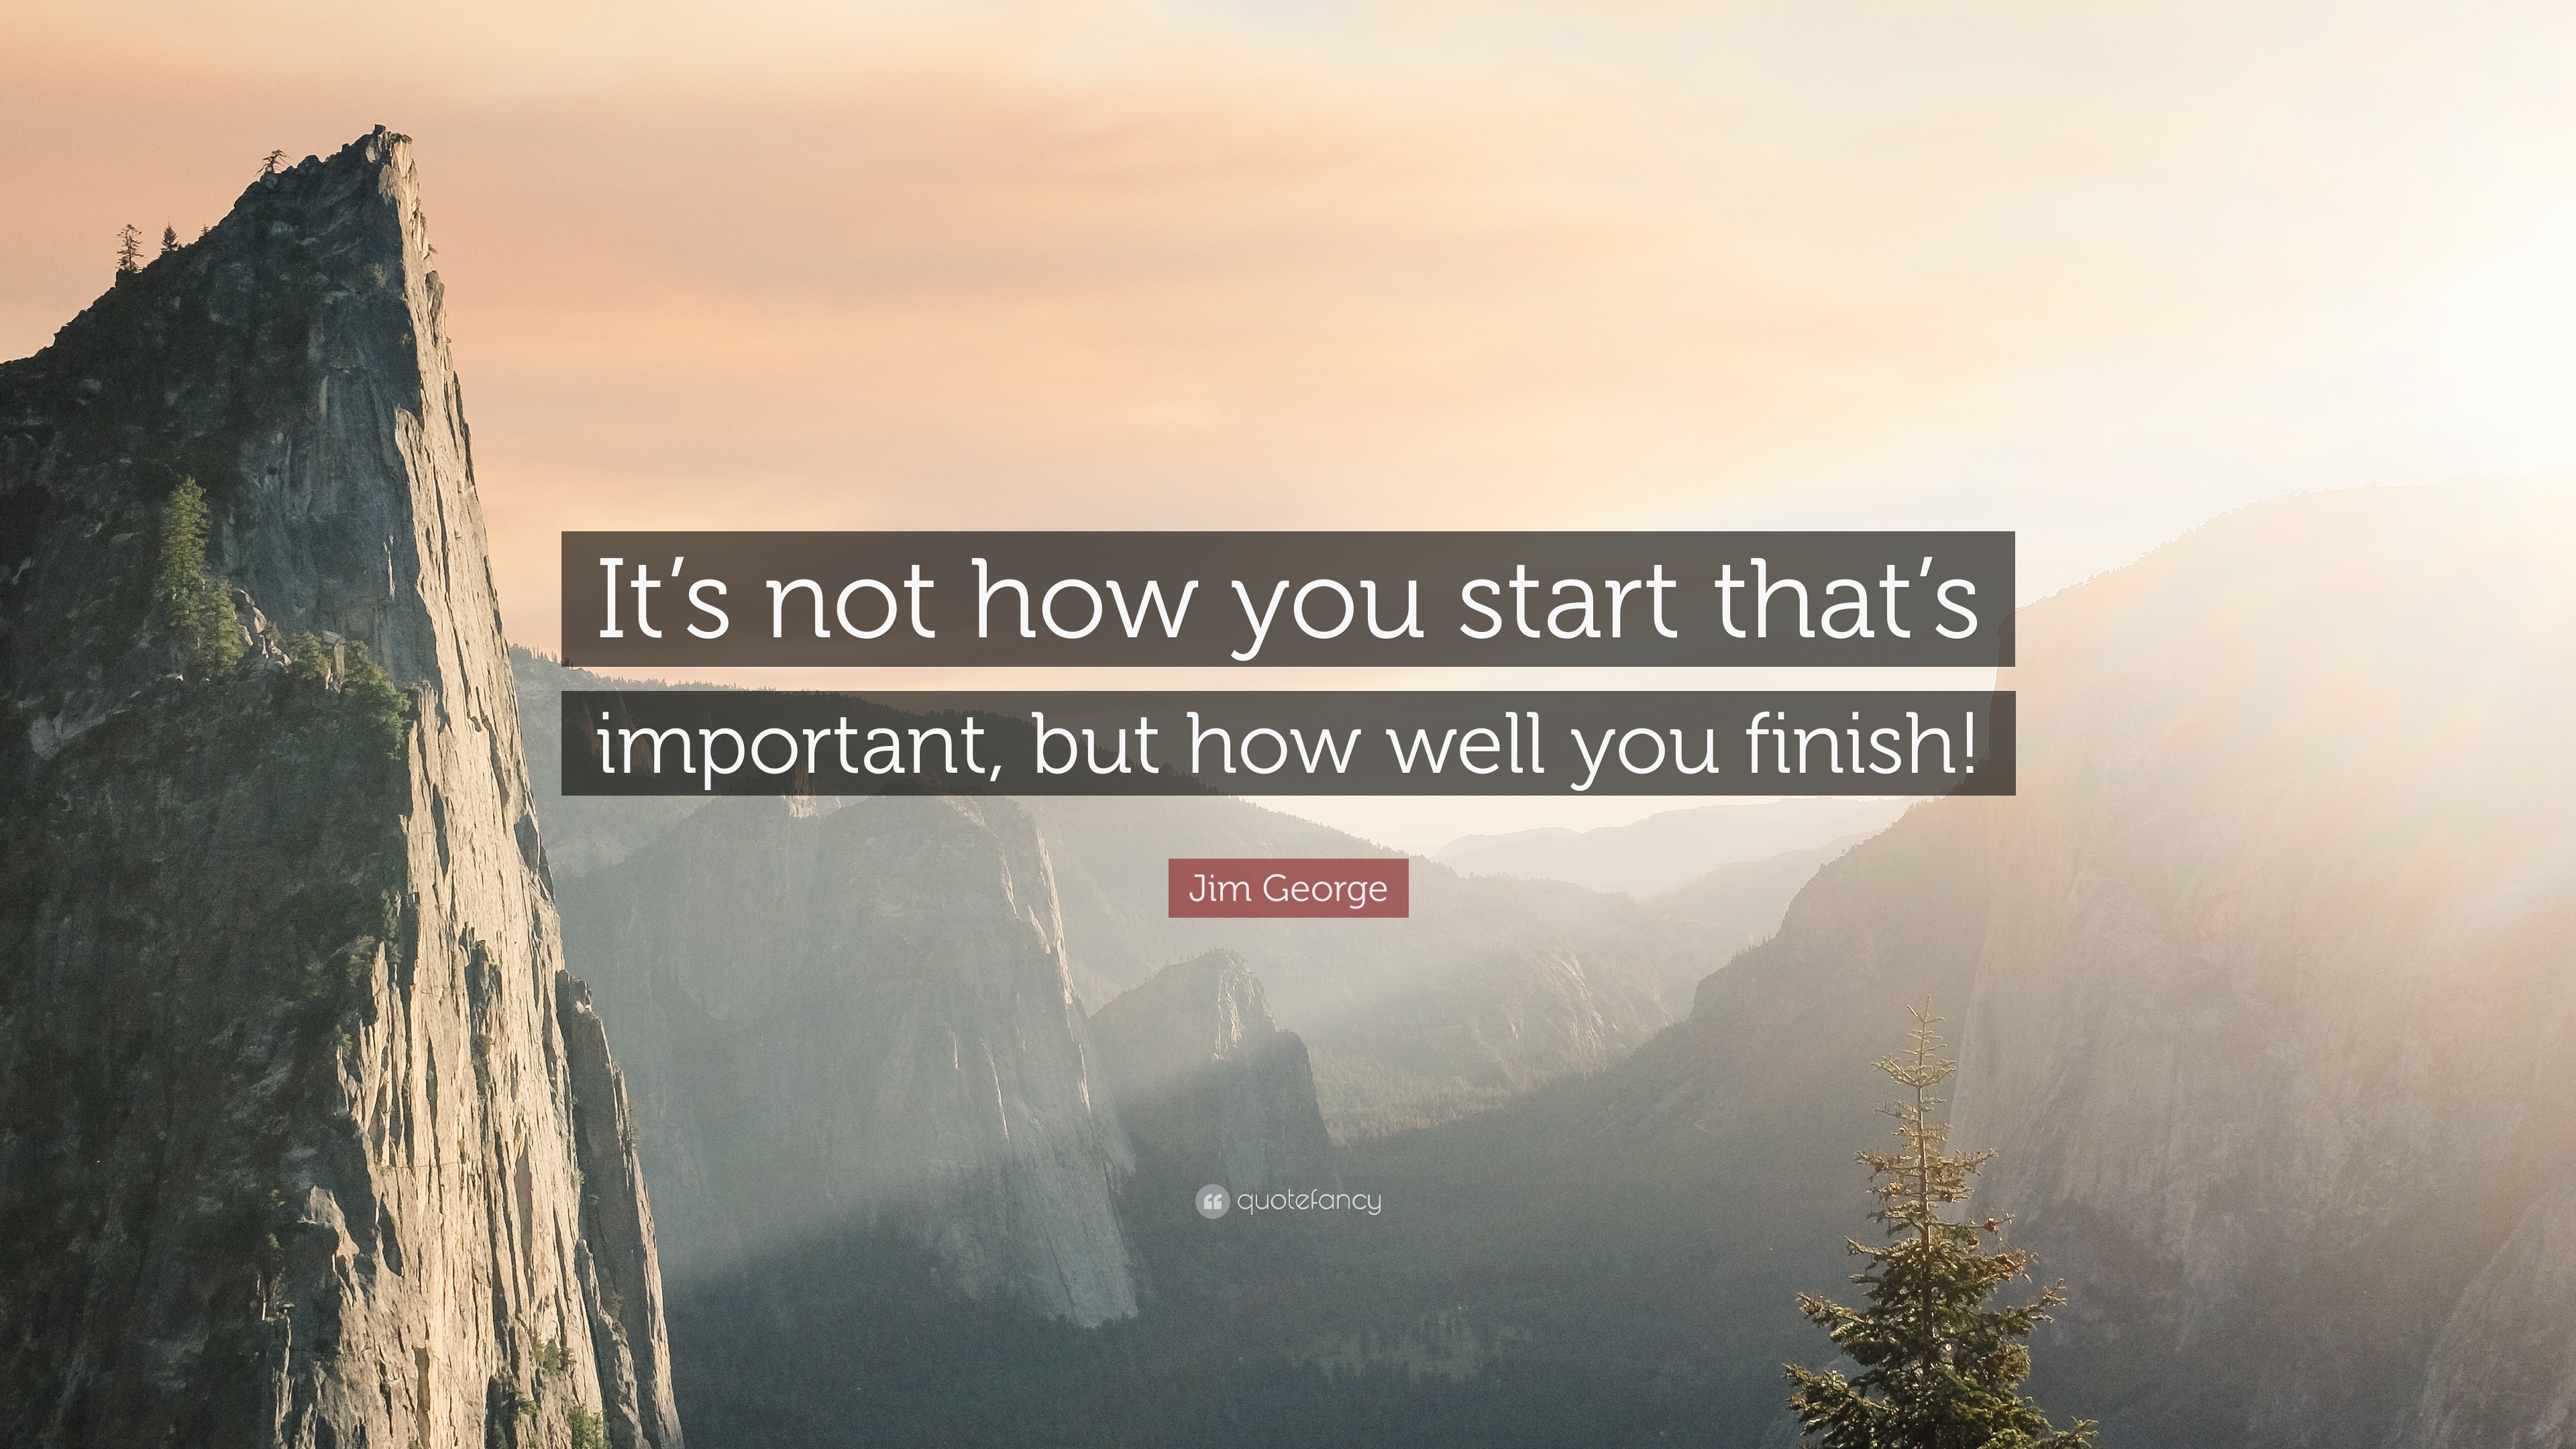 That s Not How It s Done Jim George Quote: “It's not how you start that's important, but how well  you finish!”